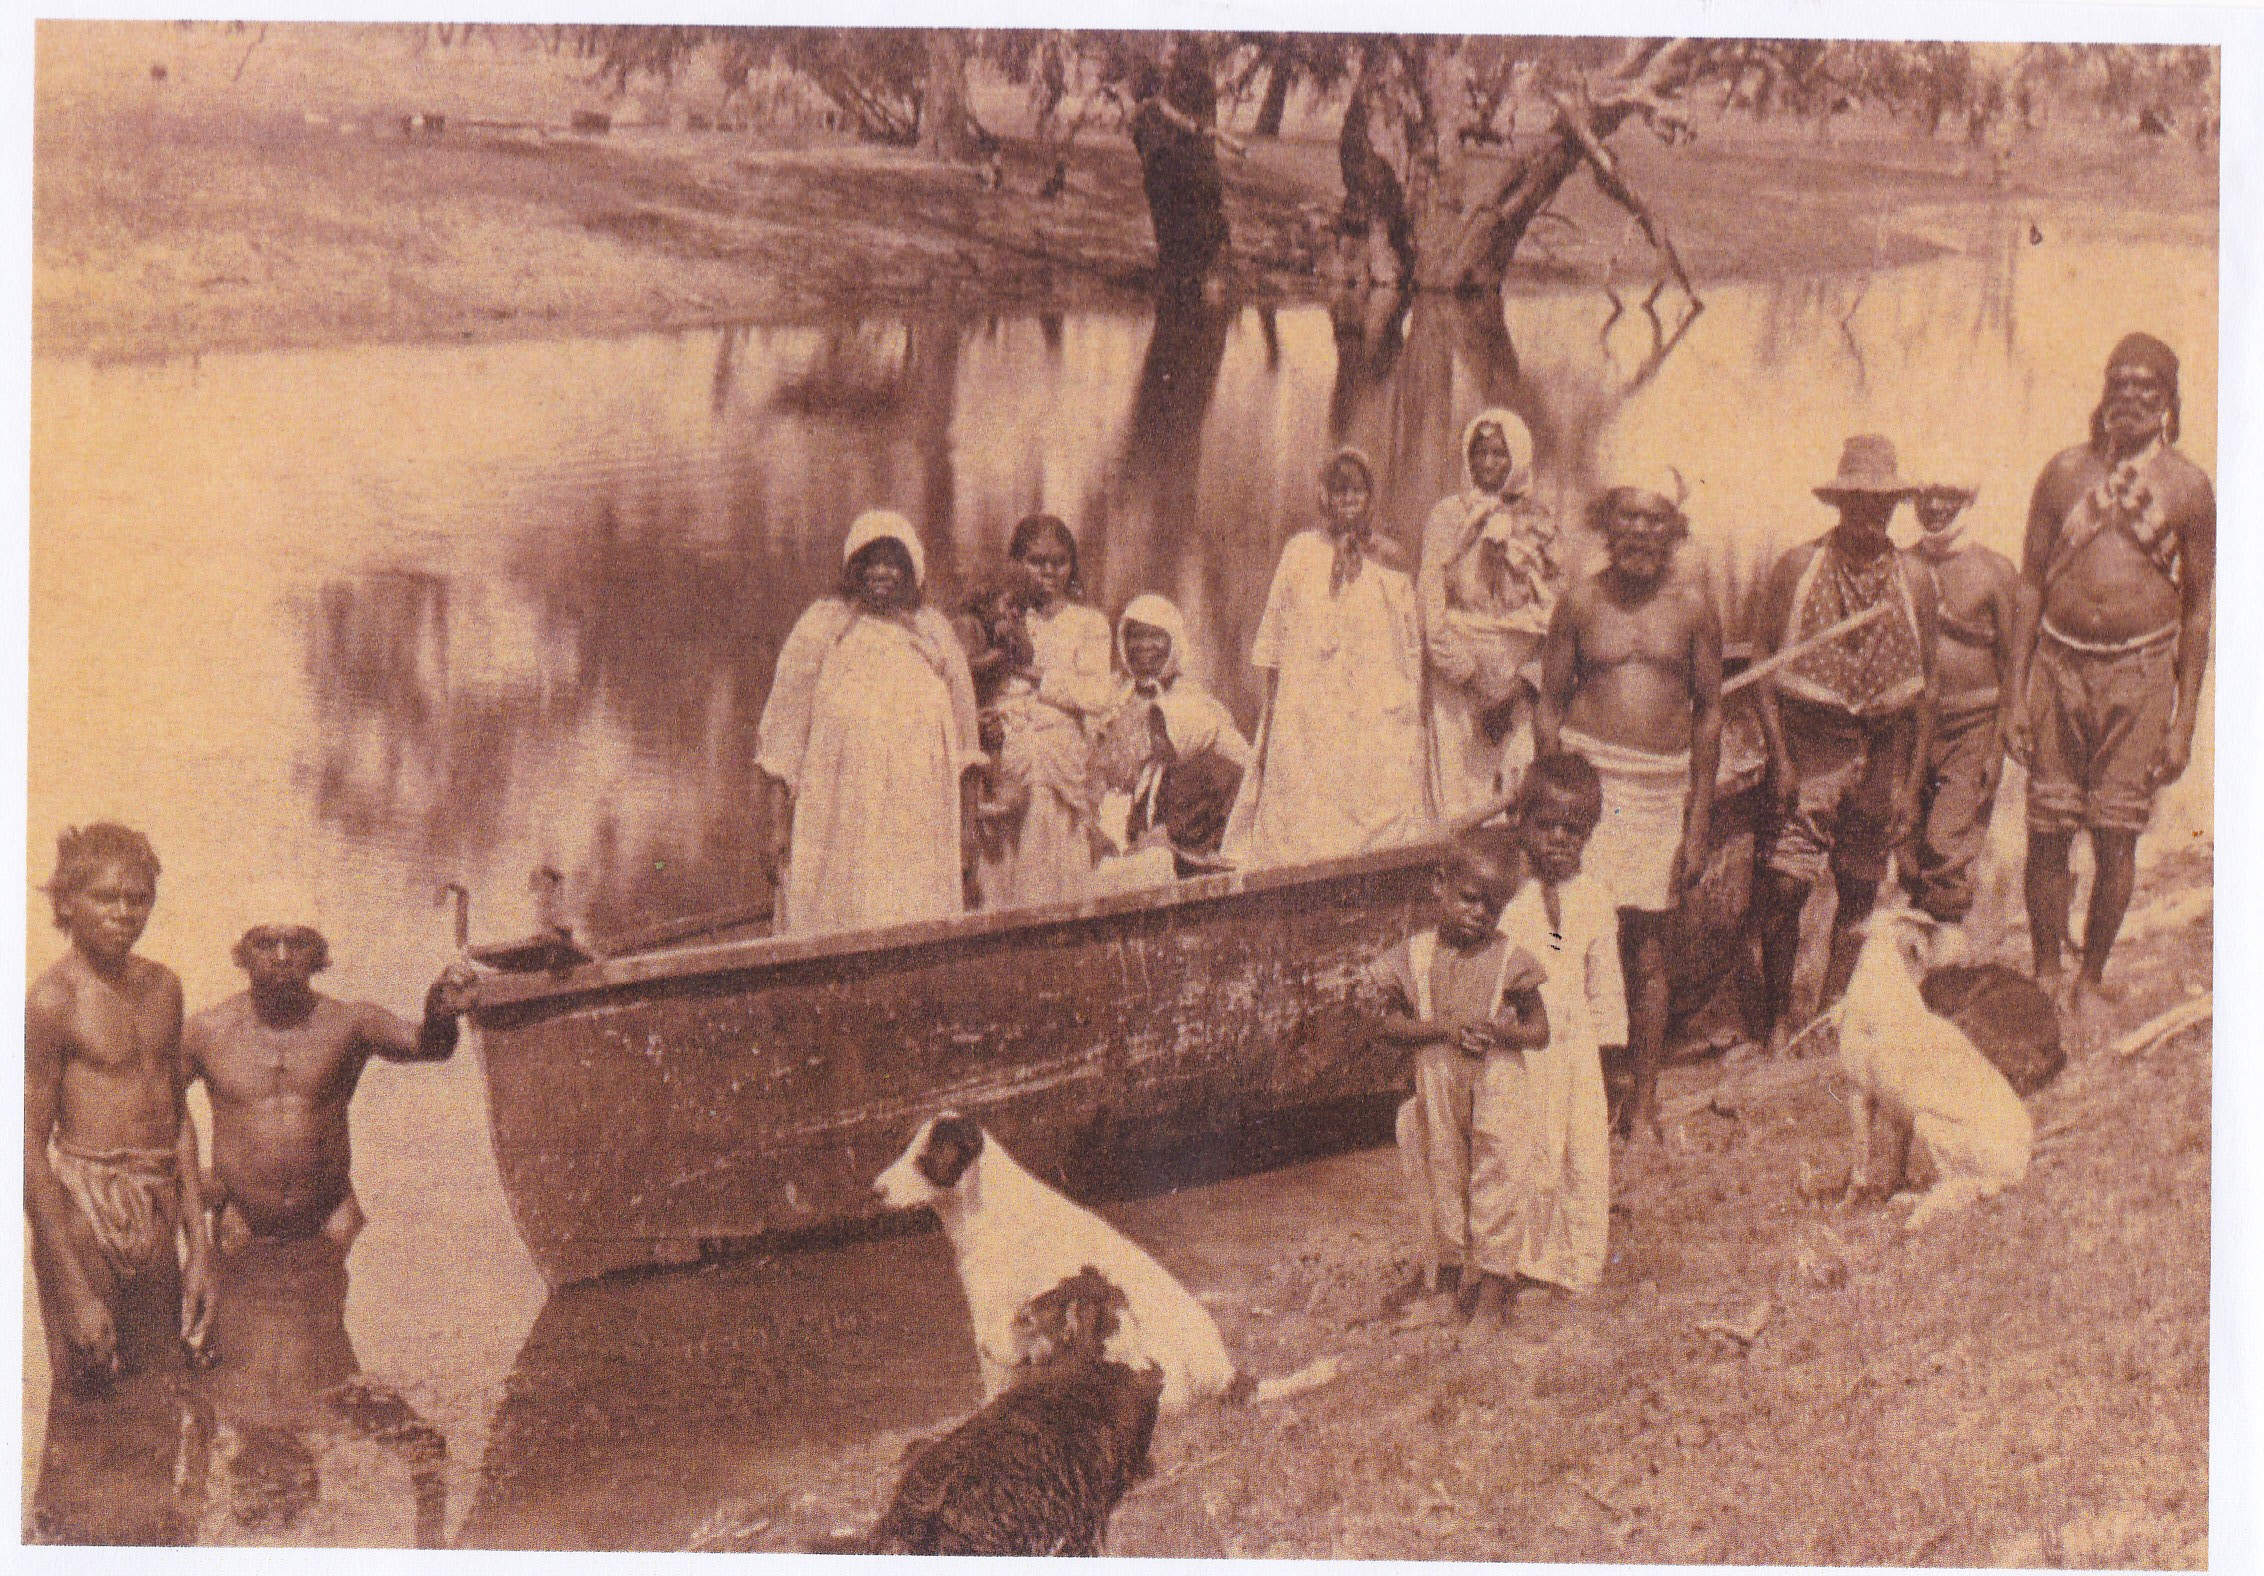 Barrington River Boat used to get to school (date unknown)